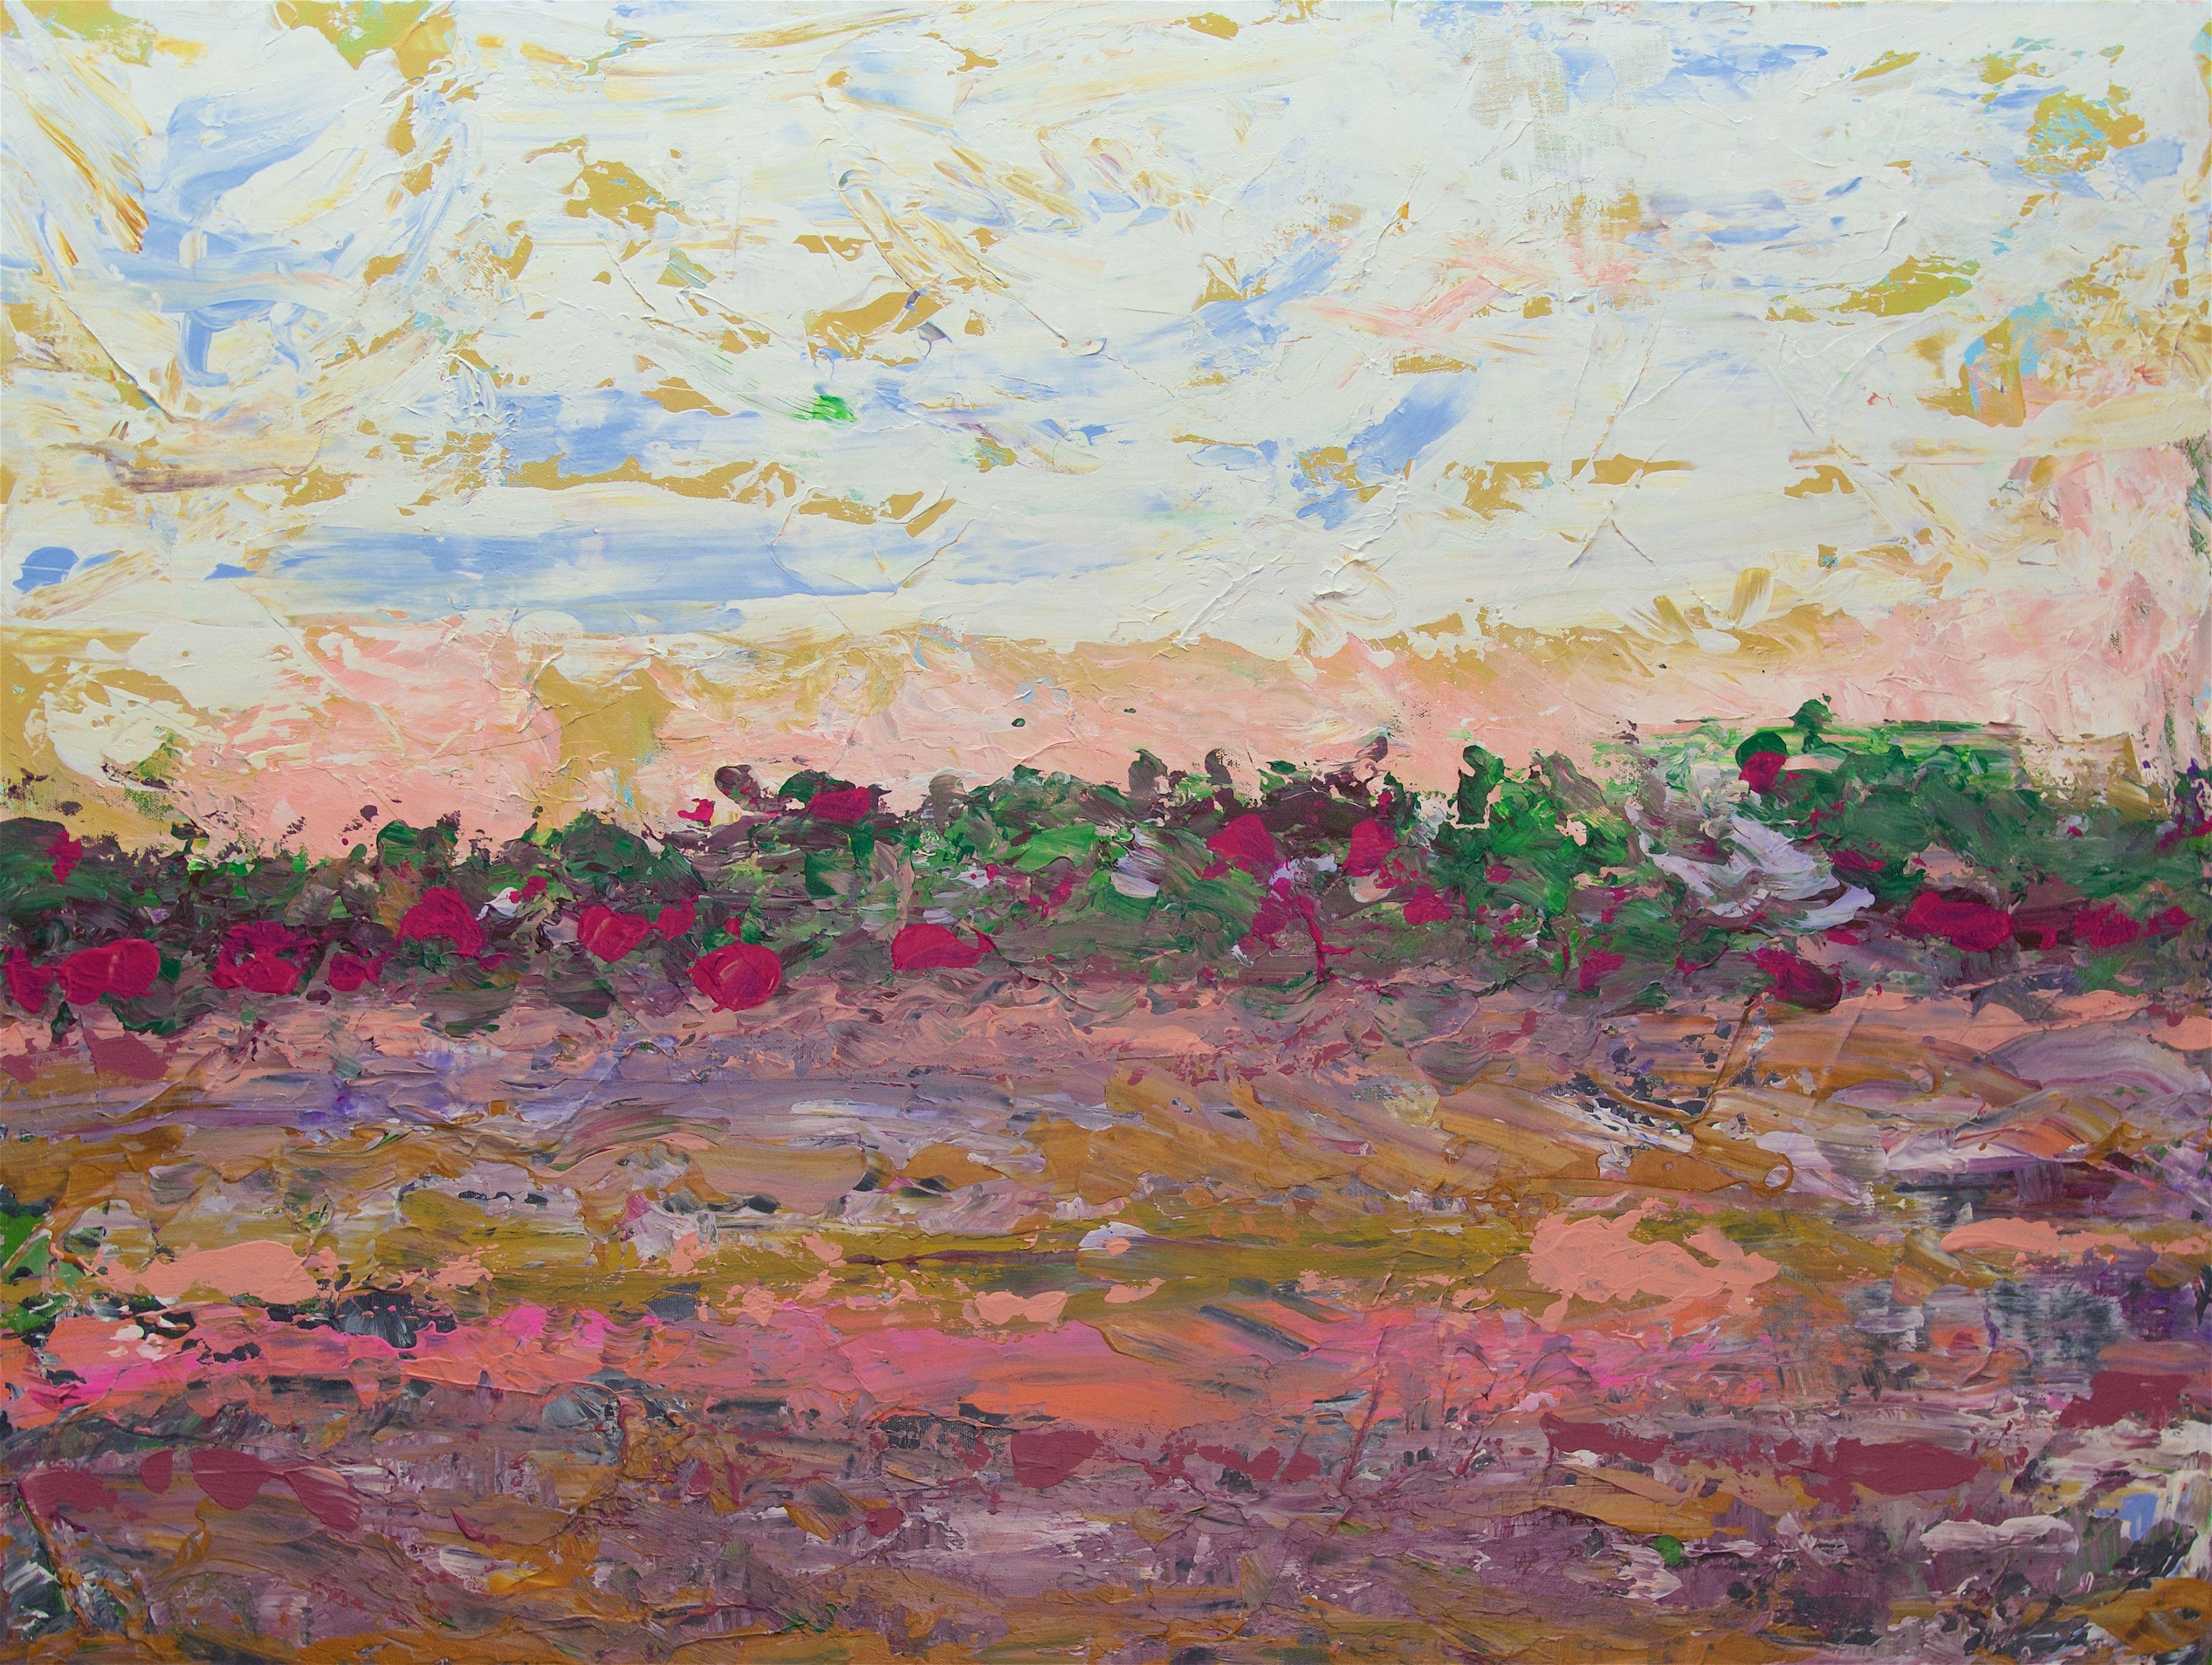 Allan P. Friedlander Abstract Painting - Summer Sunset, Painting, Acrylic on Canvas